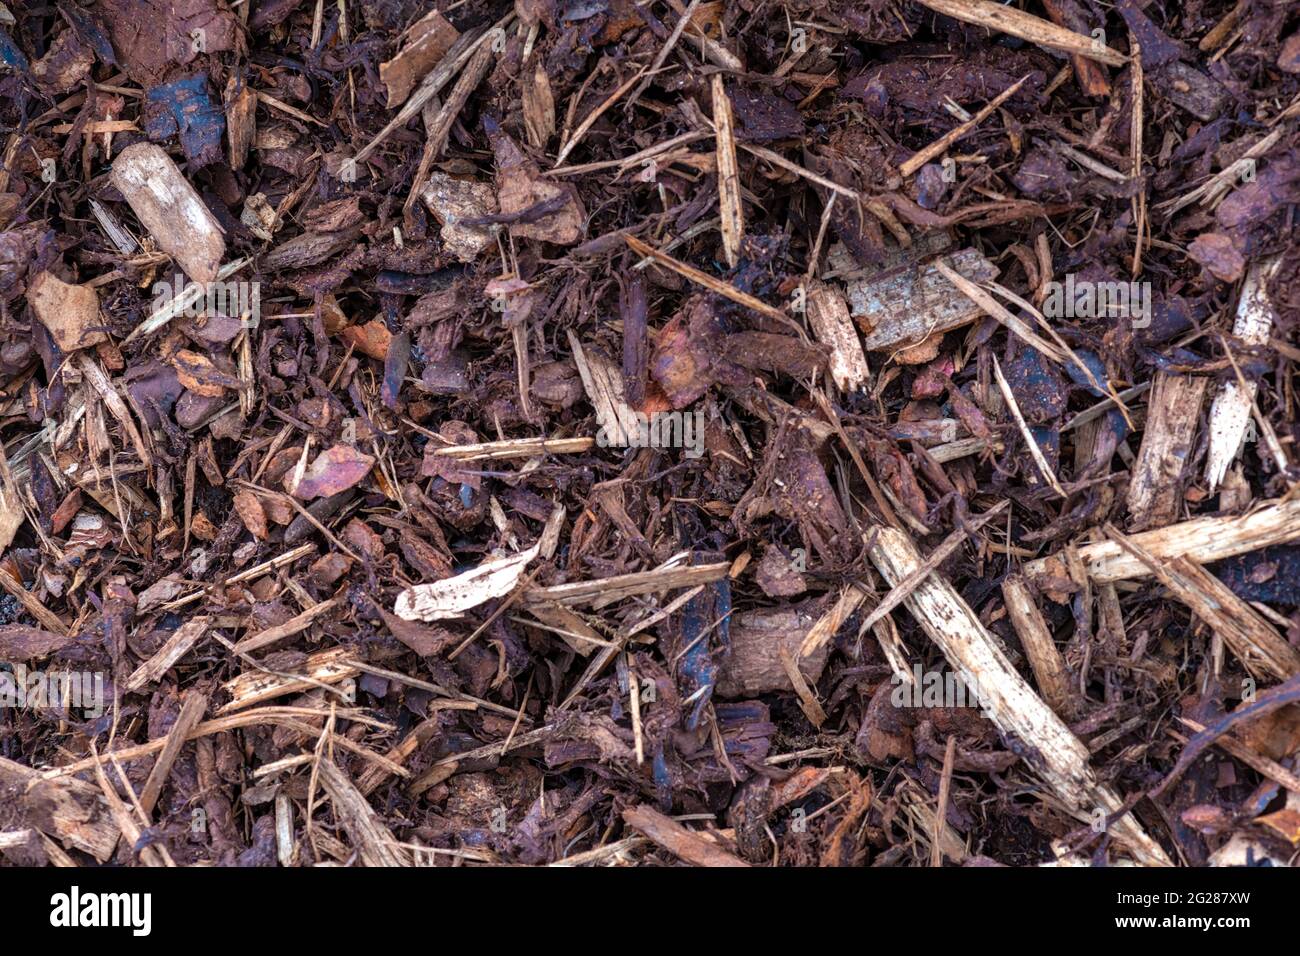 full close up image of wood chipping for mulch and ground cover to prevent weeds and contain moisture for gardens allotments and park areas Stock Photo